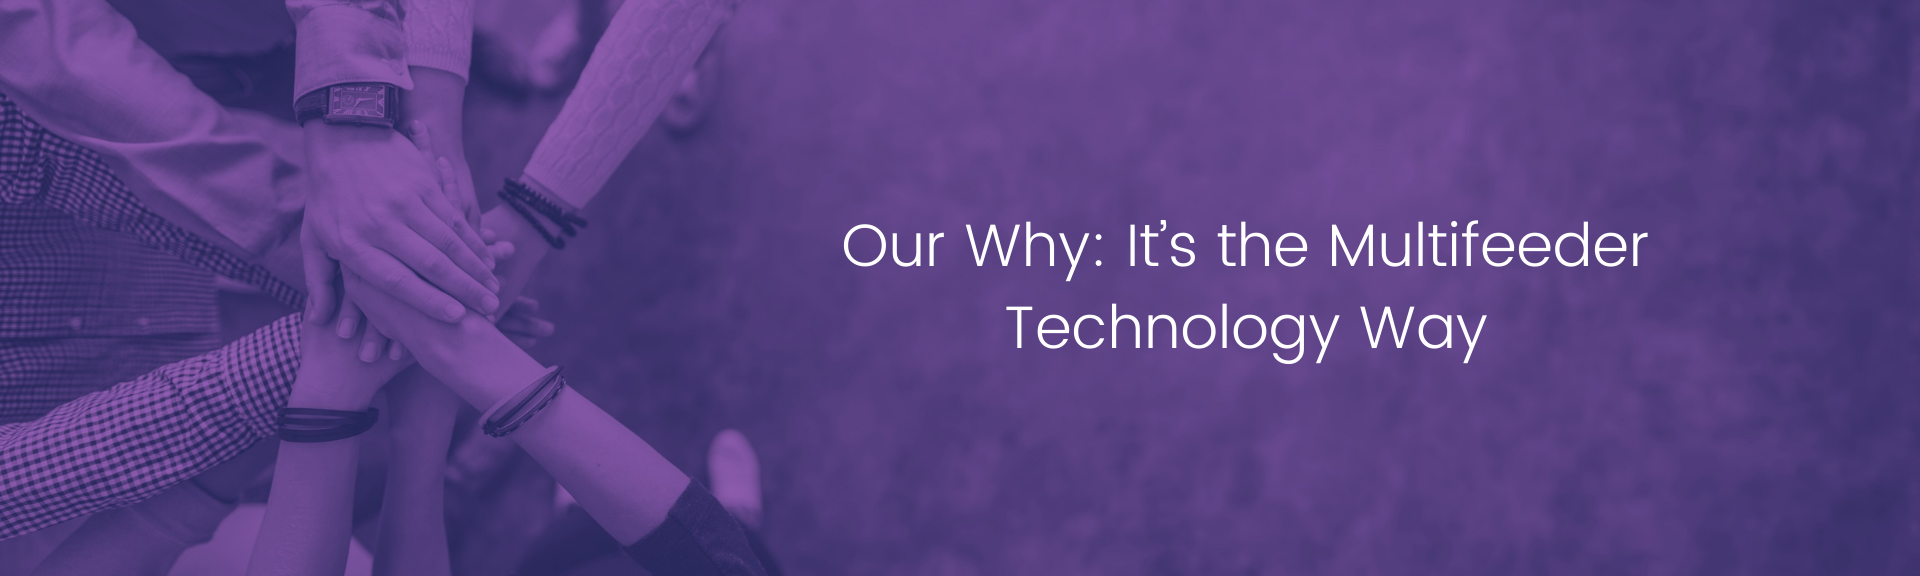 _Our Why_ It’s the Multifeeder Technology Way